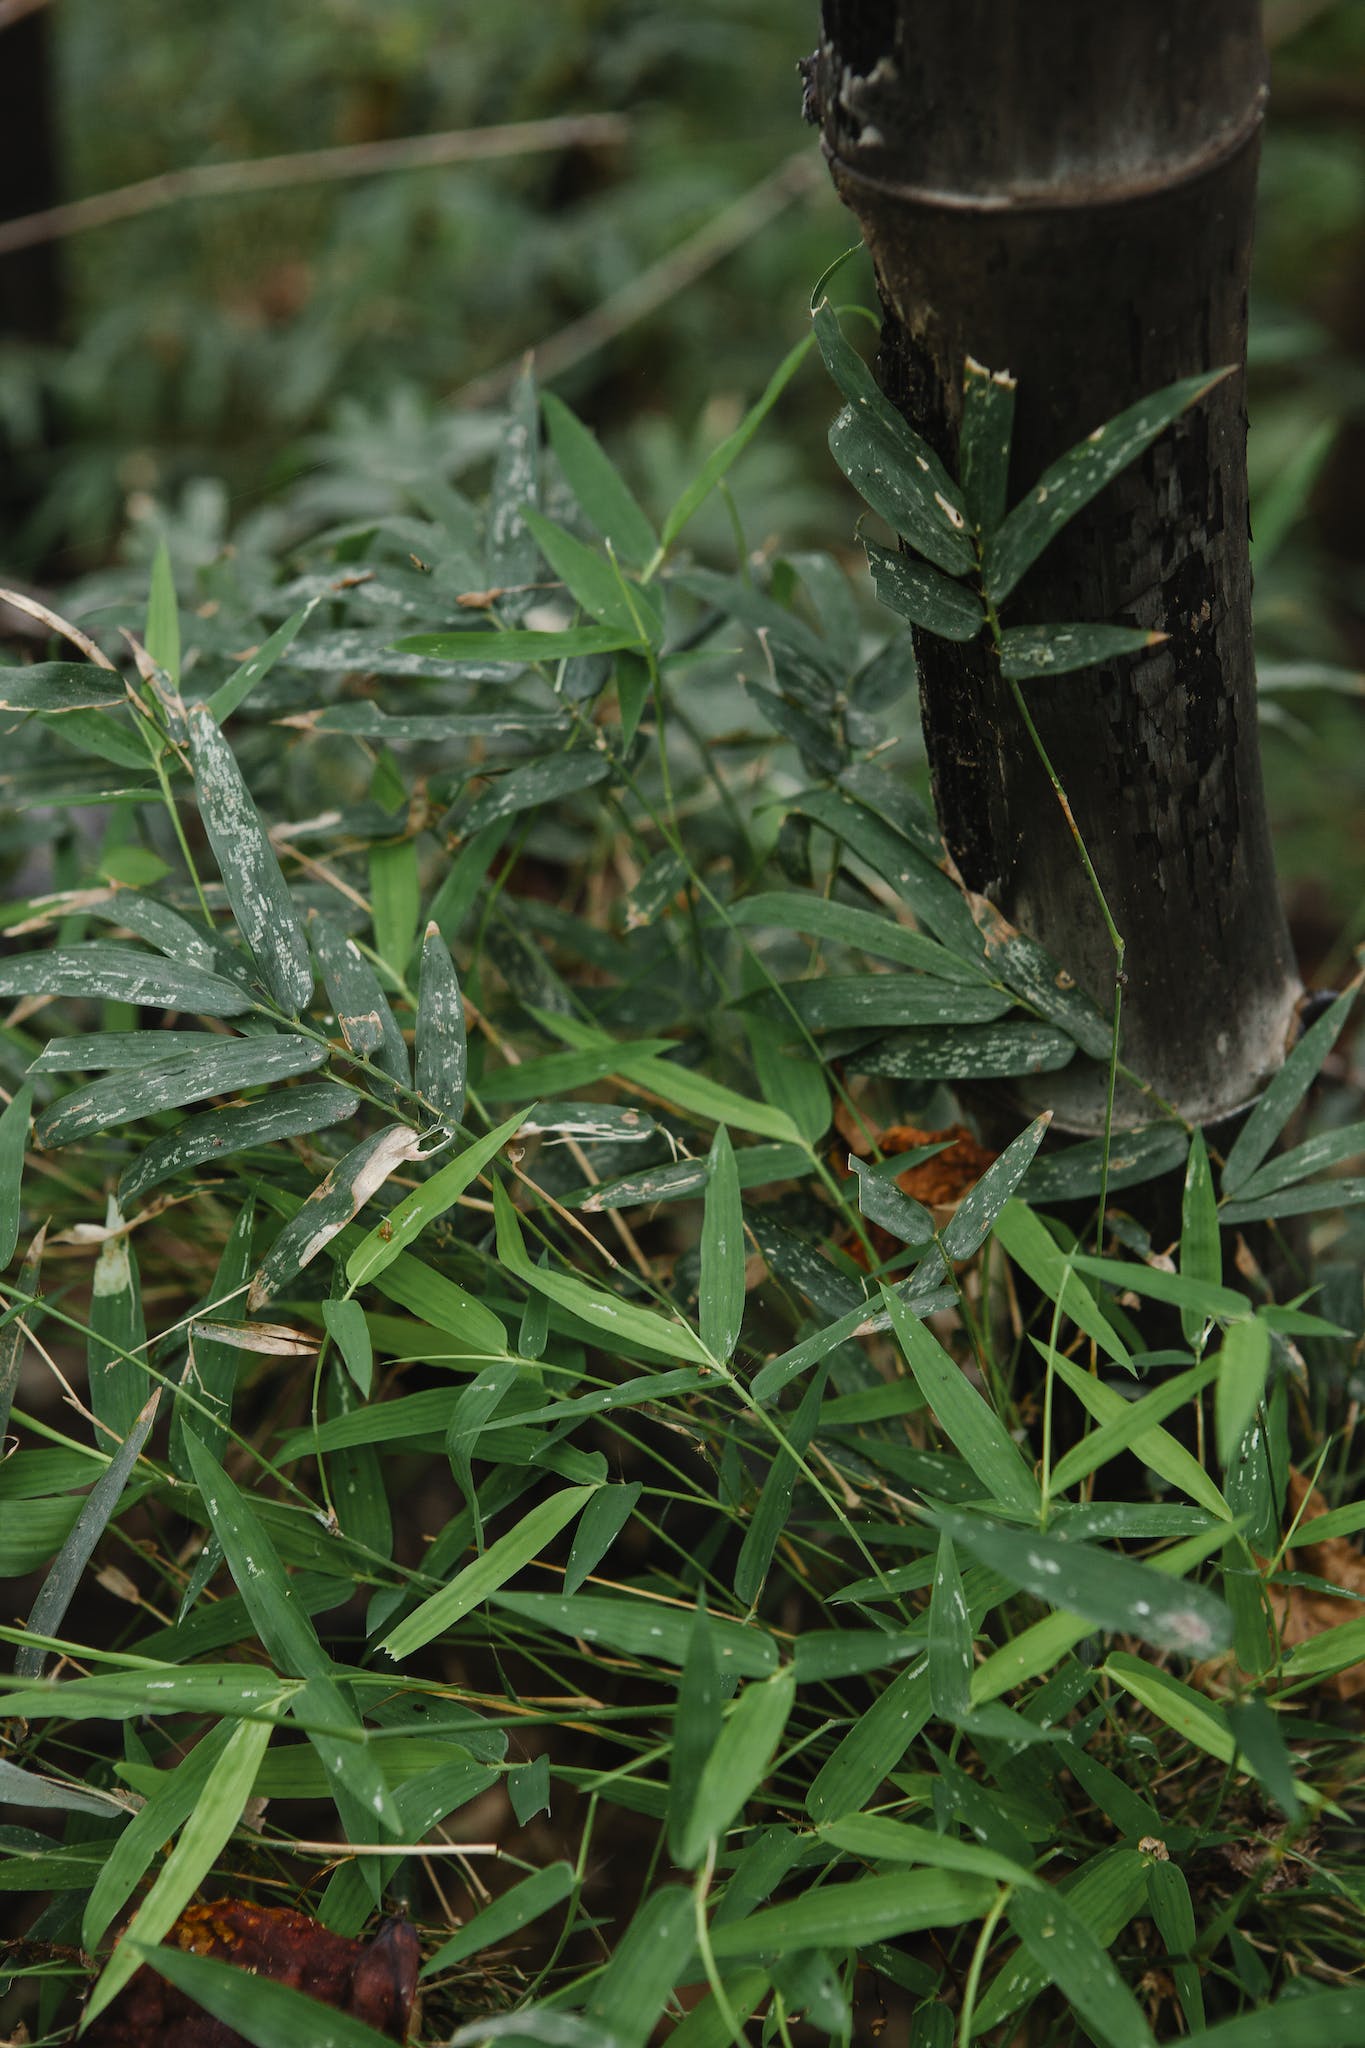 Bamboo tree trunk and leaves growing in tropical woods